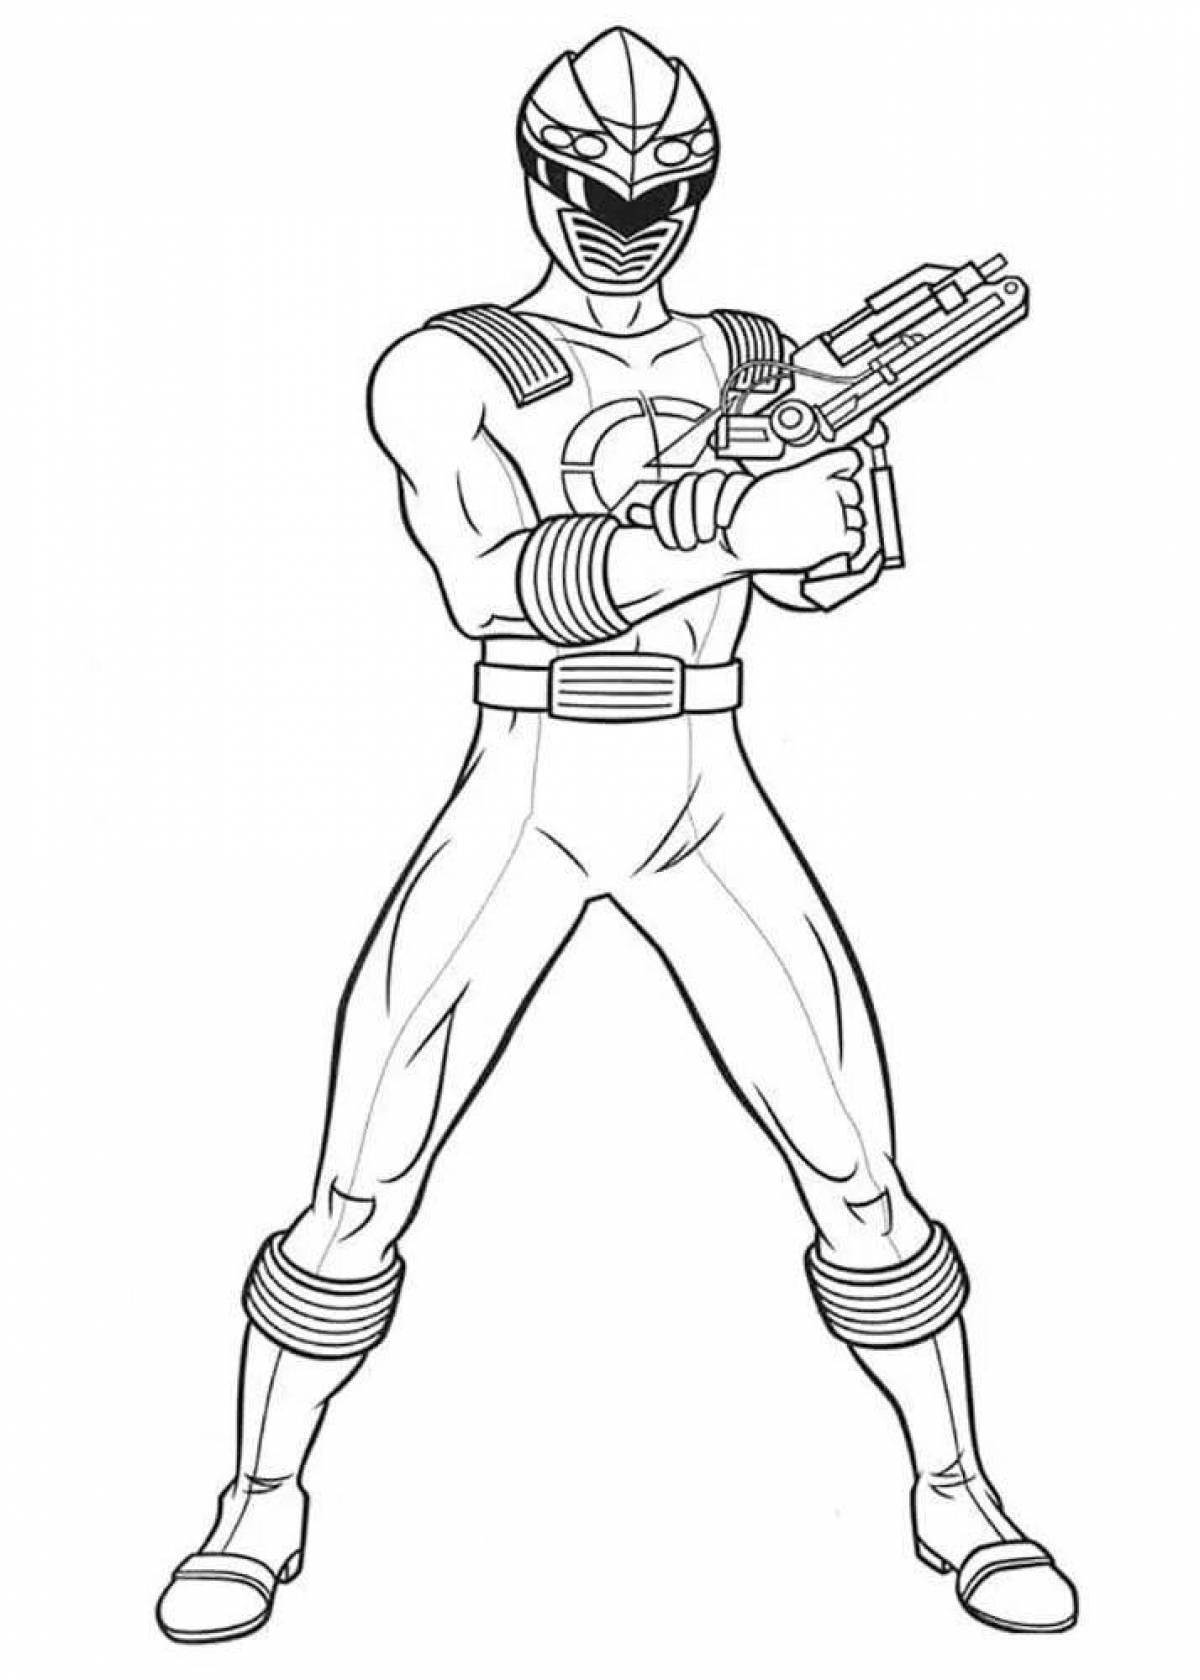 Power rangers coloring page